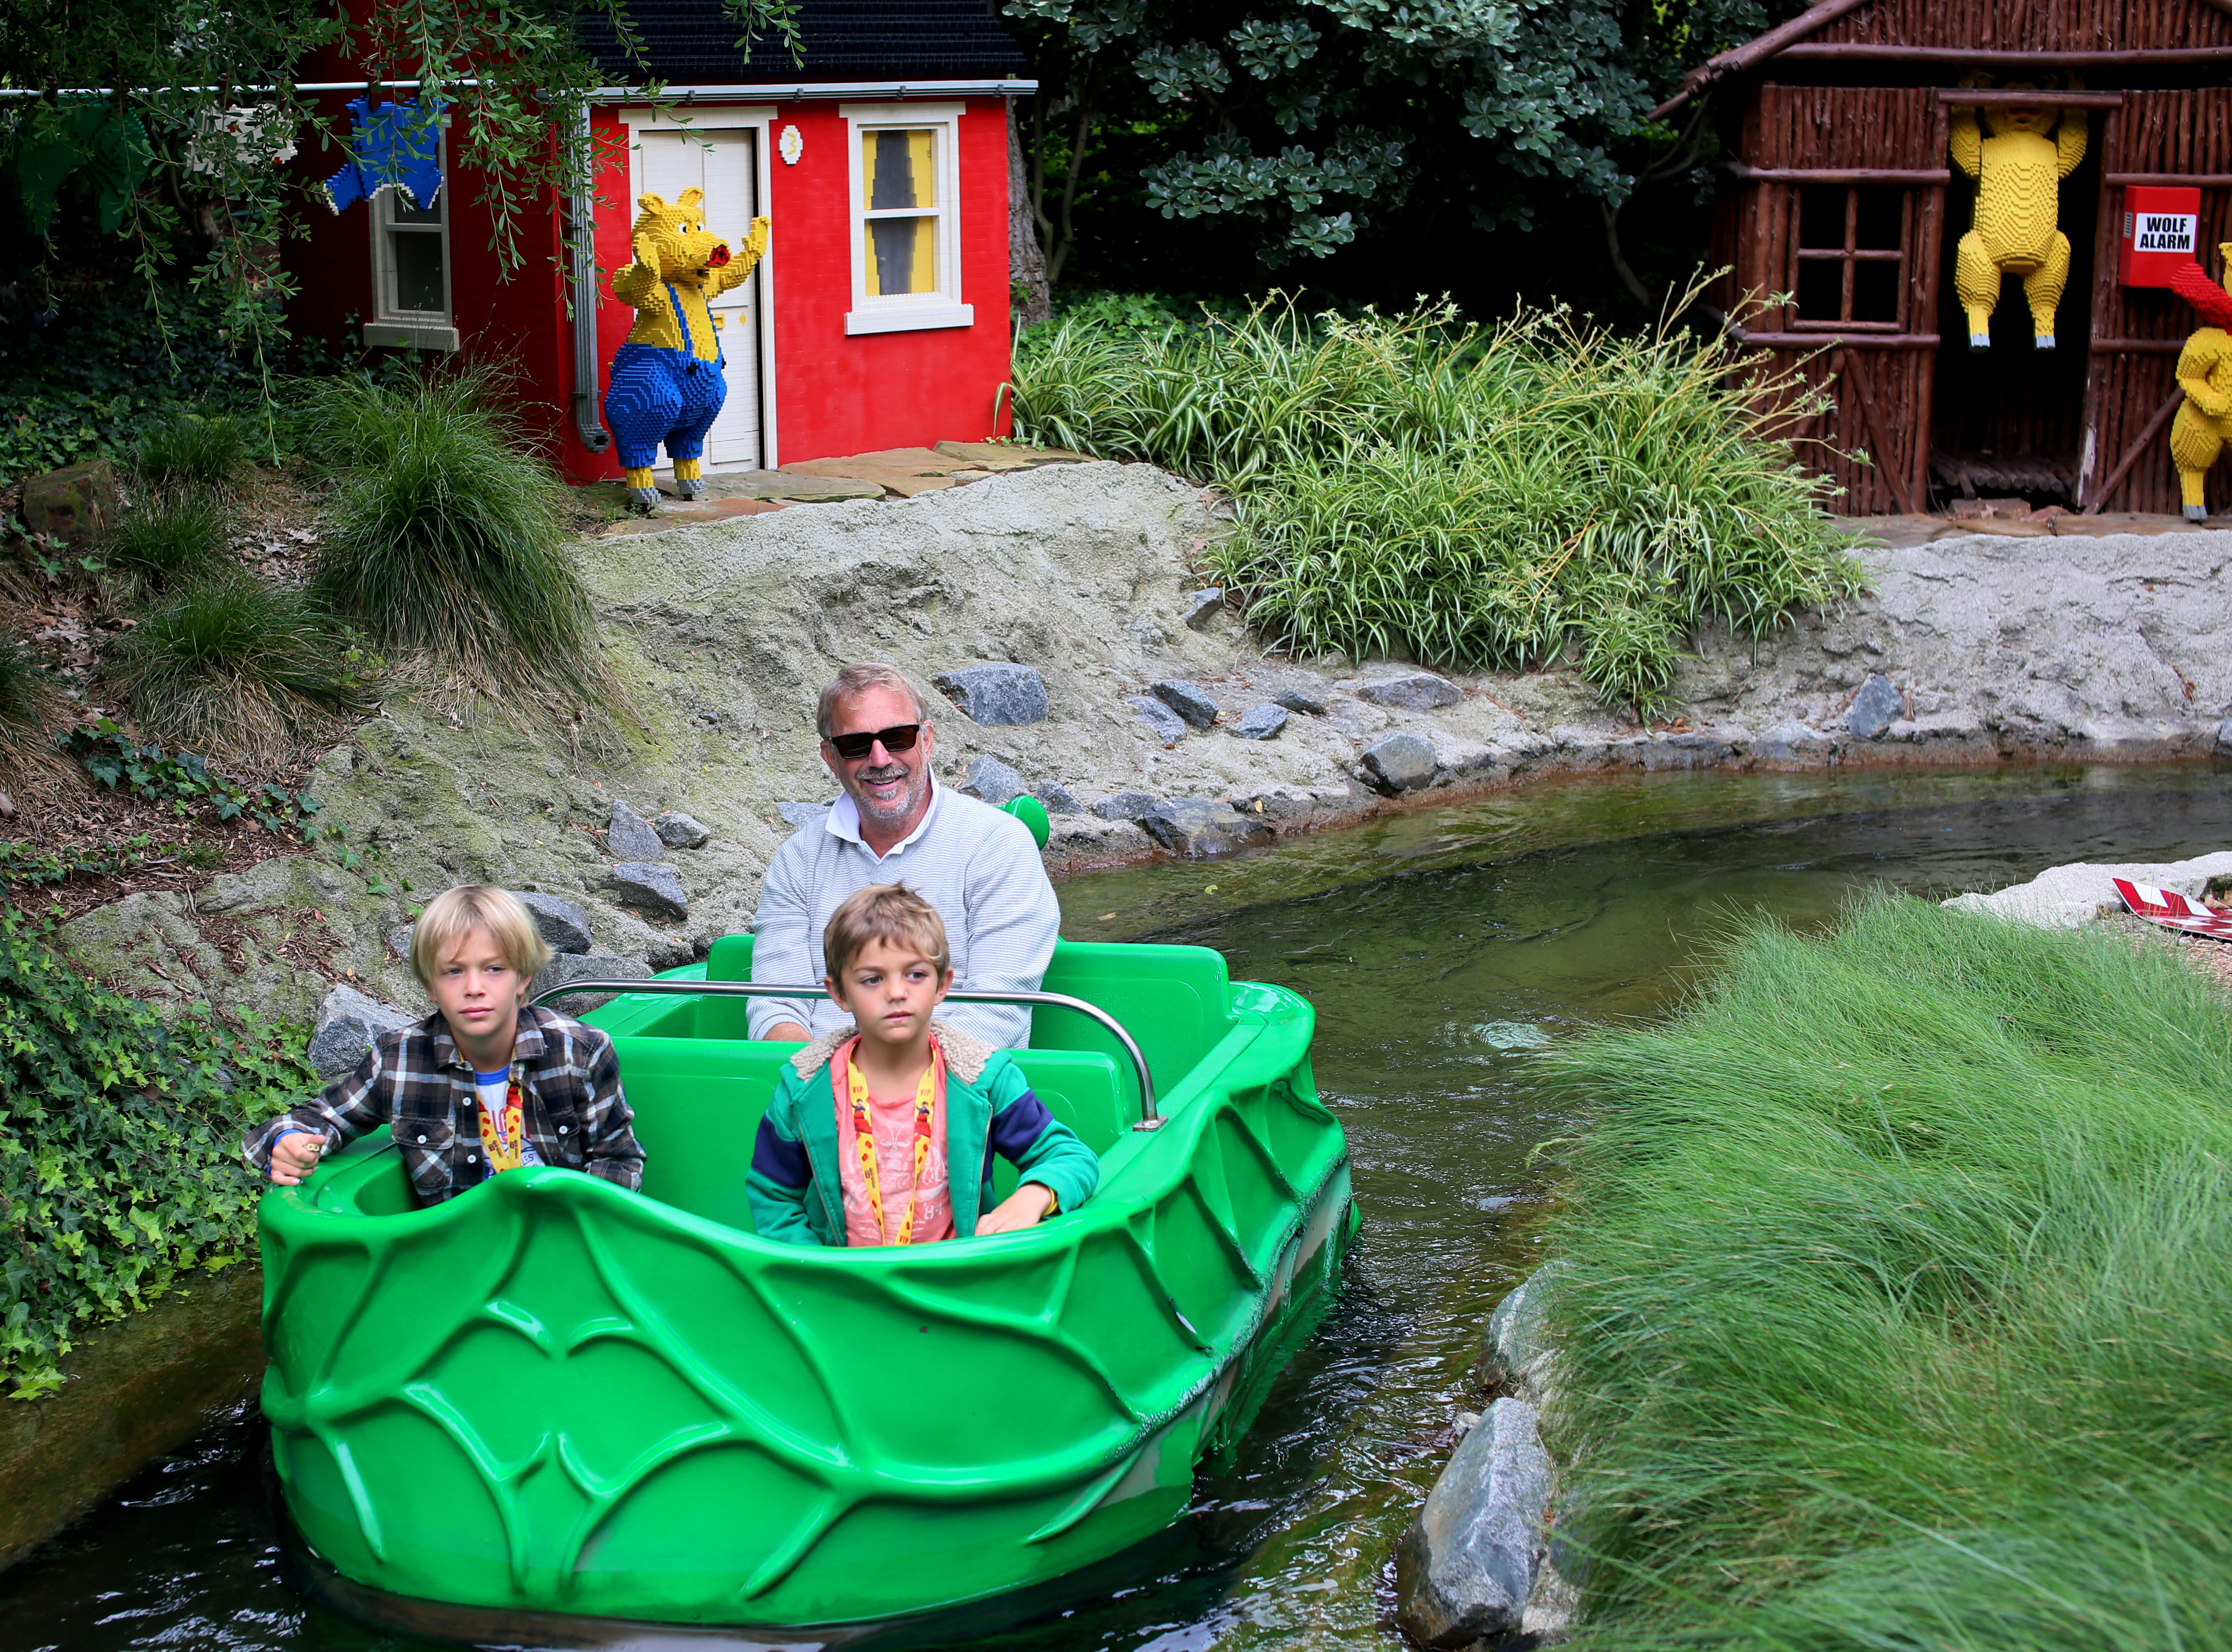 Kevin Costner on a ride with his sons at Legoland California on Wednesday, May 27, 2015 in Carlsbad, California | Source: Getty Imagees